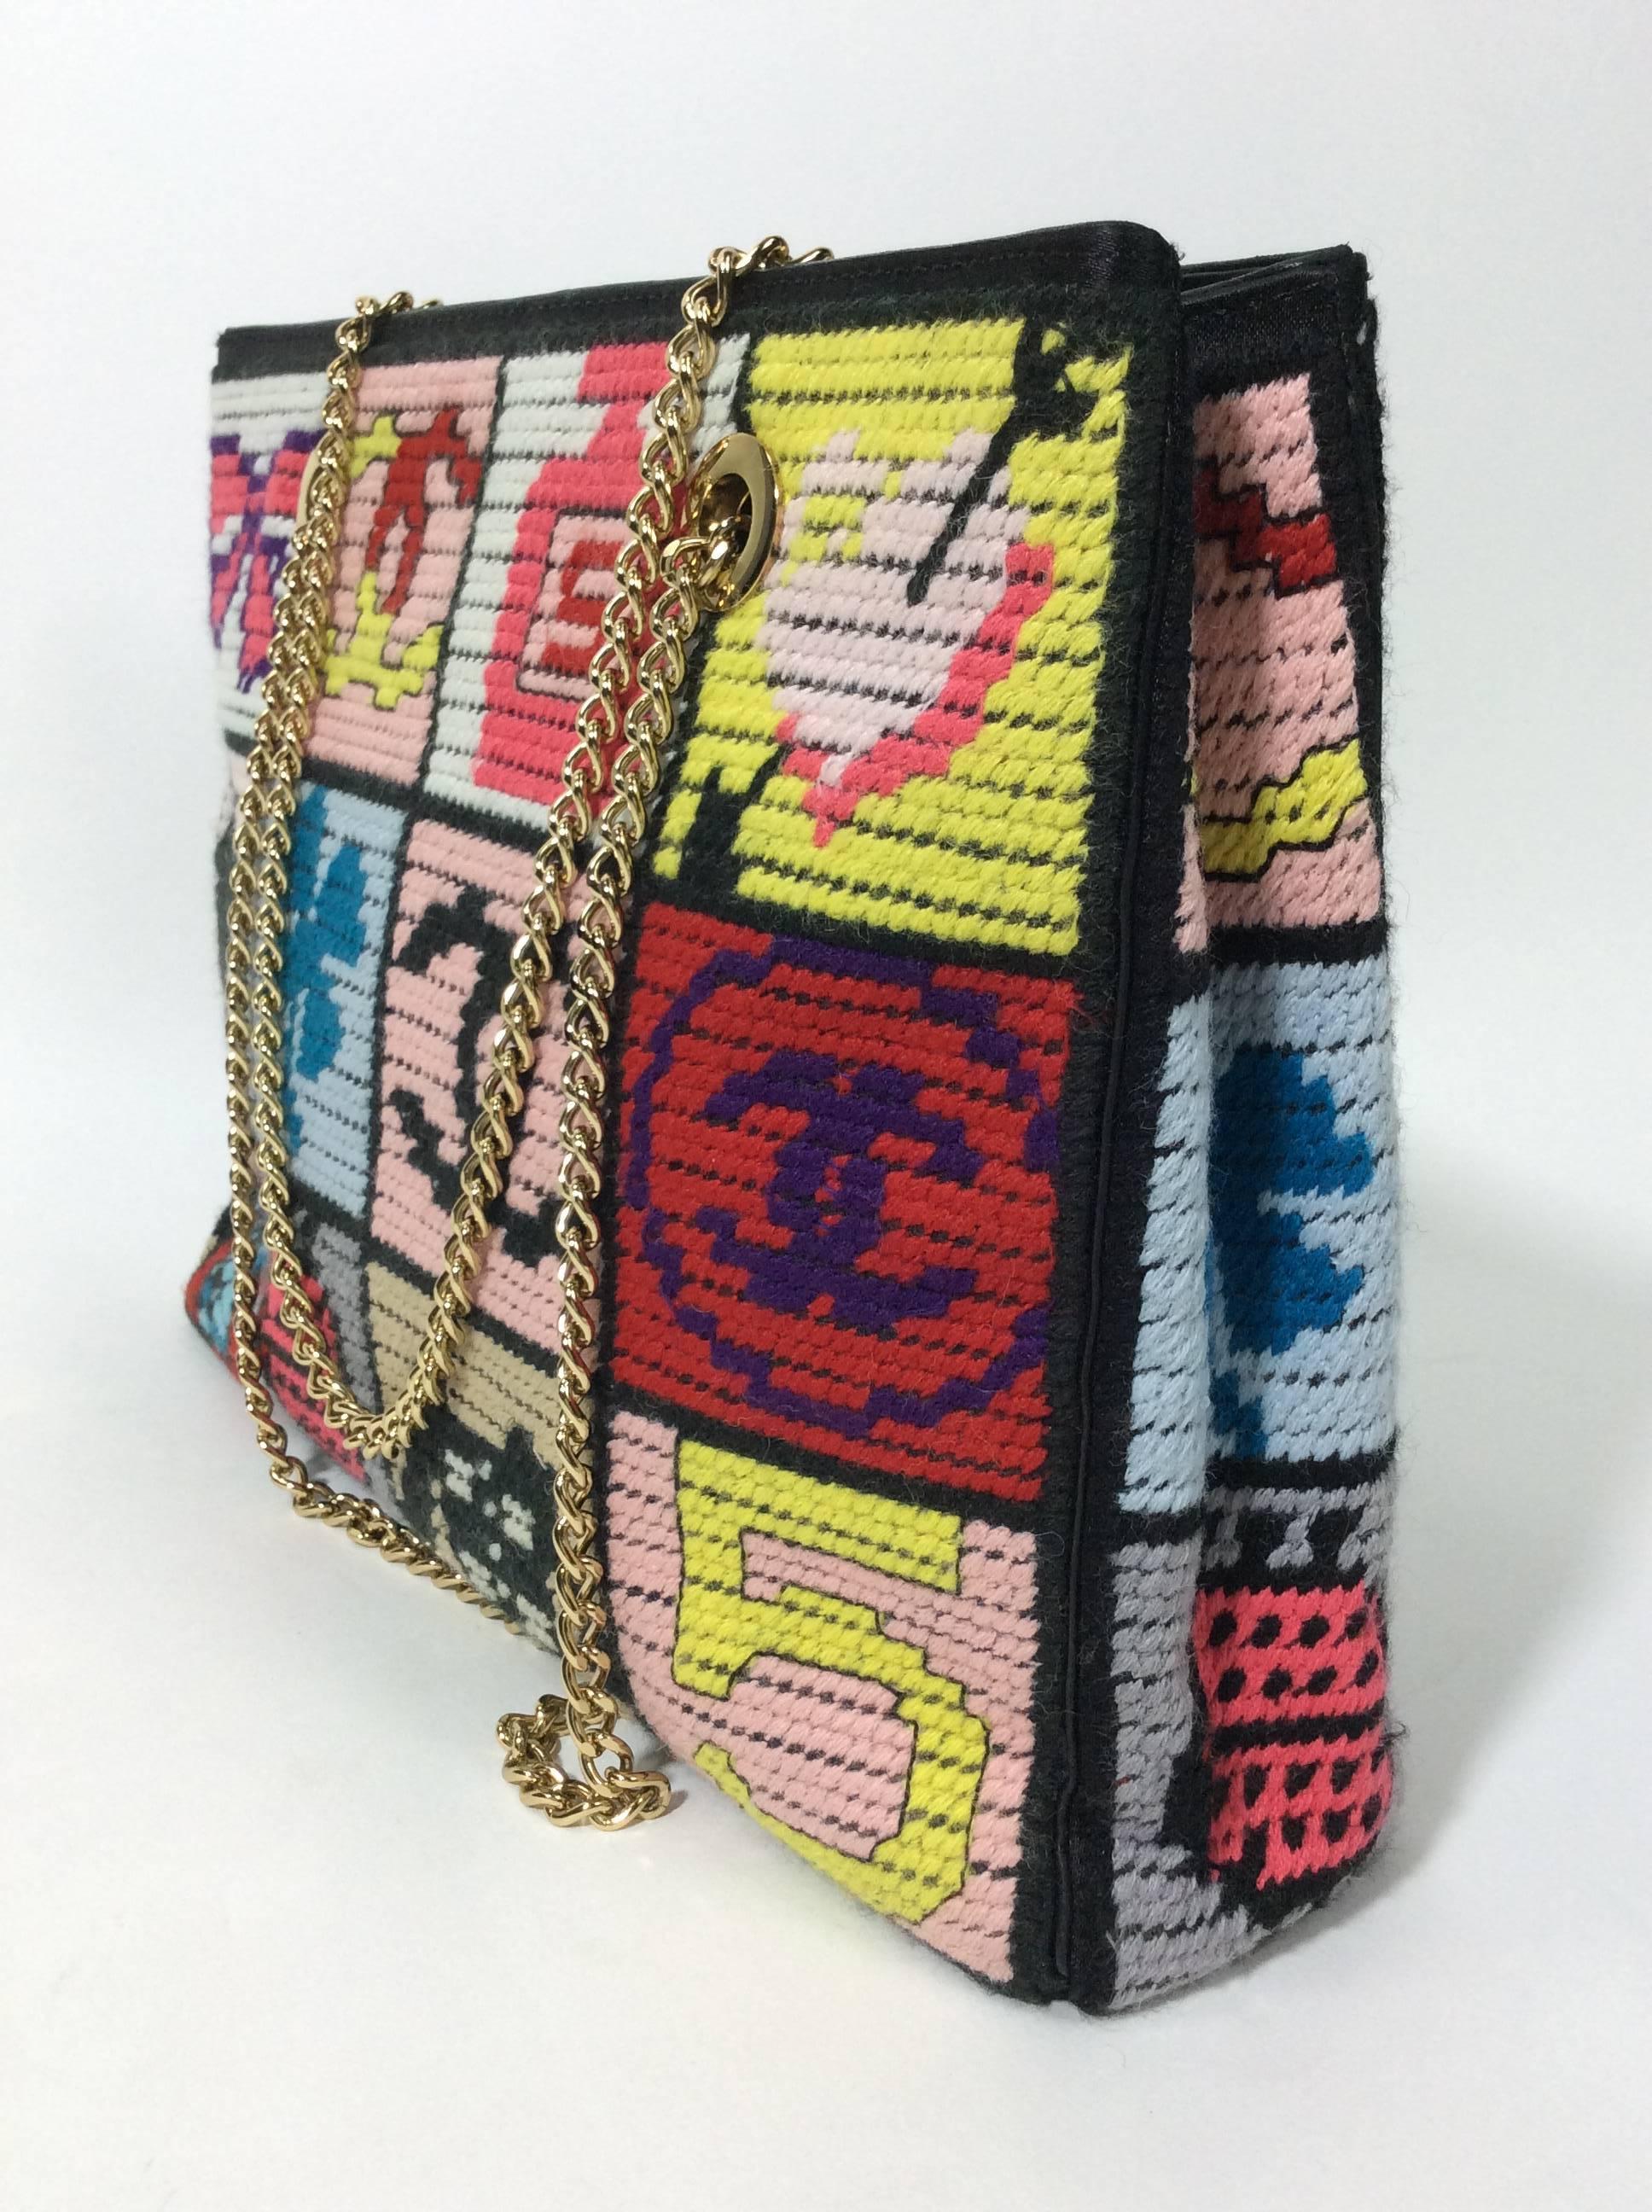 Precious Symbols Embroidered Patchwork Top Handle Bag
Limited Edition bag from 2002
8.5 inches tall, 11 inches wide, and 3 inches deep
8.5 inch strap drop
Embroidered patchwork symbols in pink, red, yellow, teal blue, and purple with black